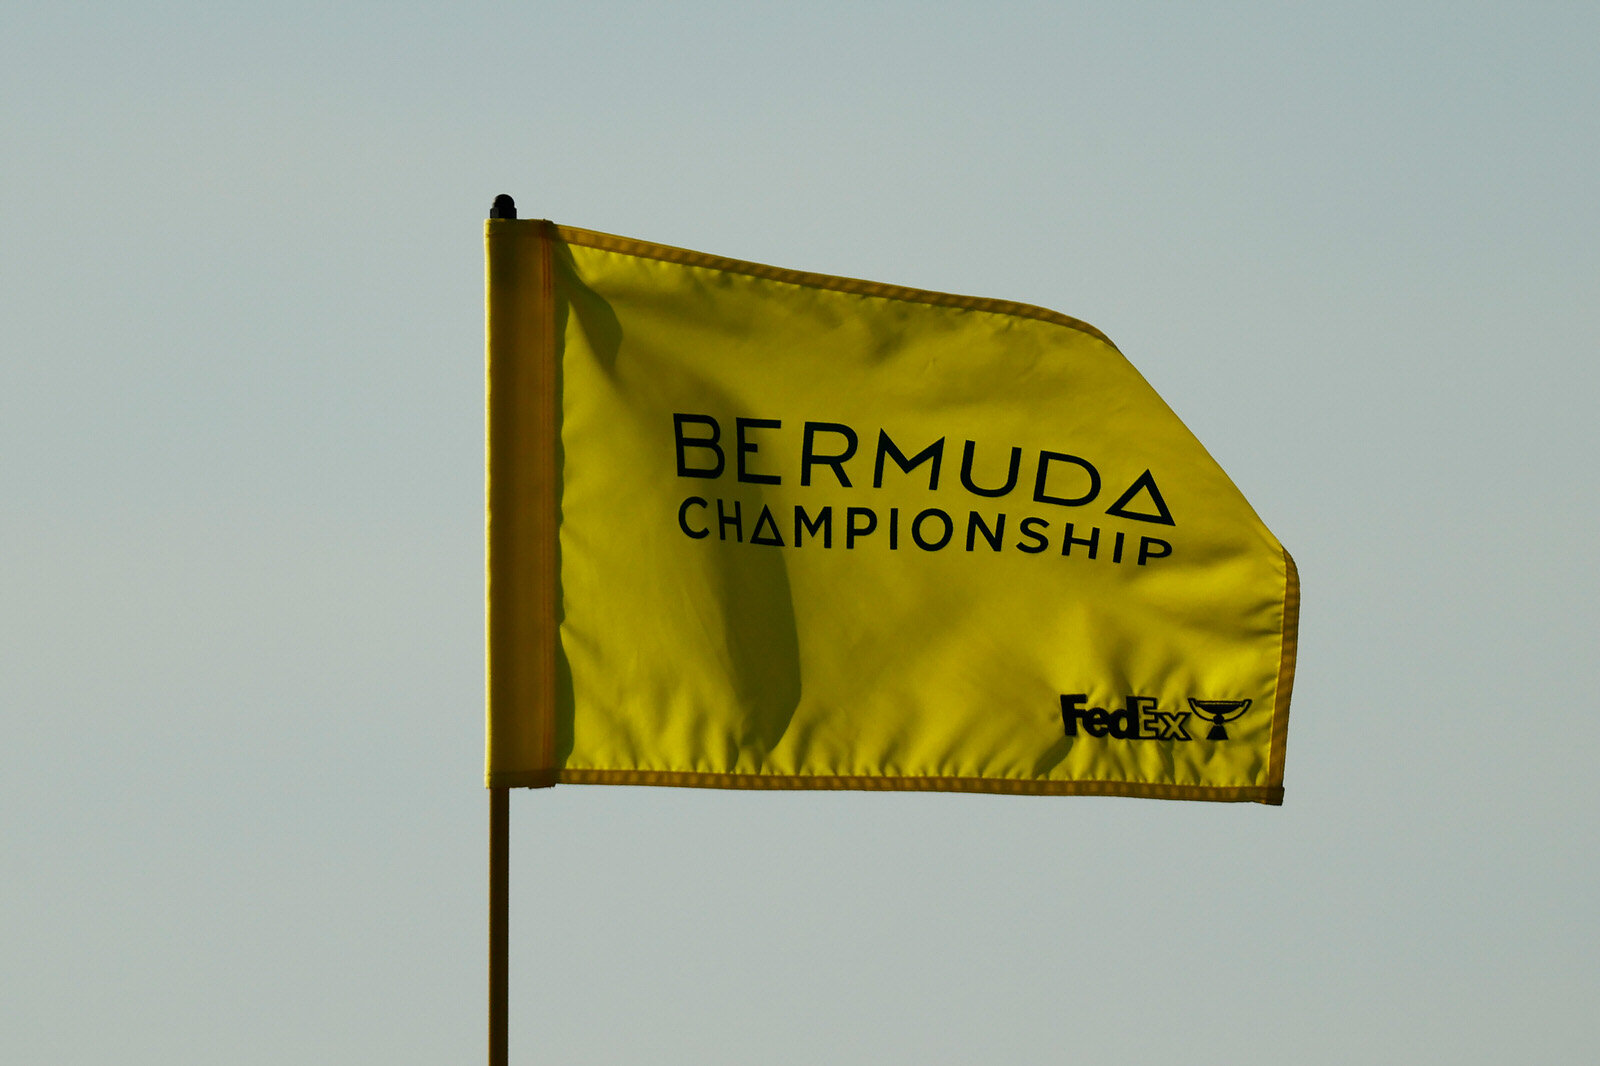  SOUTHAMPTON, BERMUDA - OCTOBER 29: A pin flag is displayed during the first round of the Bermuda Championship at Port Royal Golf Course on October 29, 2020 in Southampton, Bermuda. (Photo by Gregory Shamus/Getty Images) 